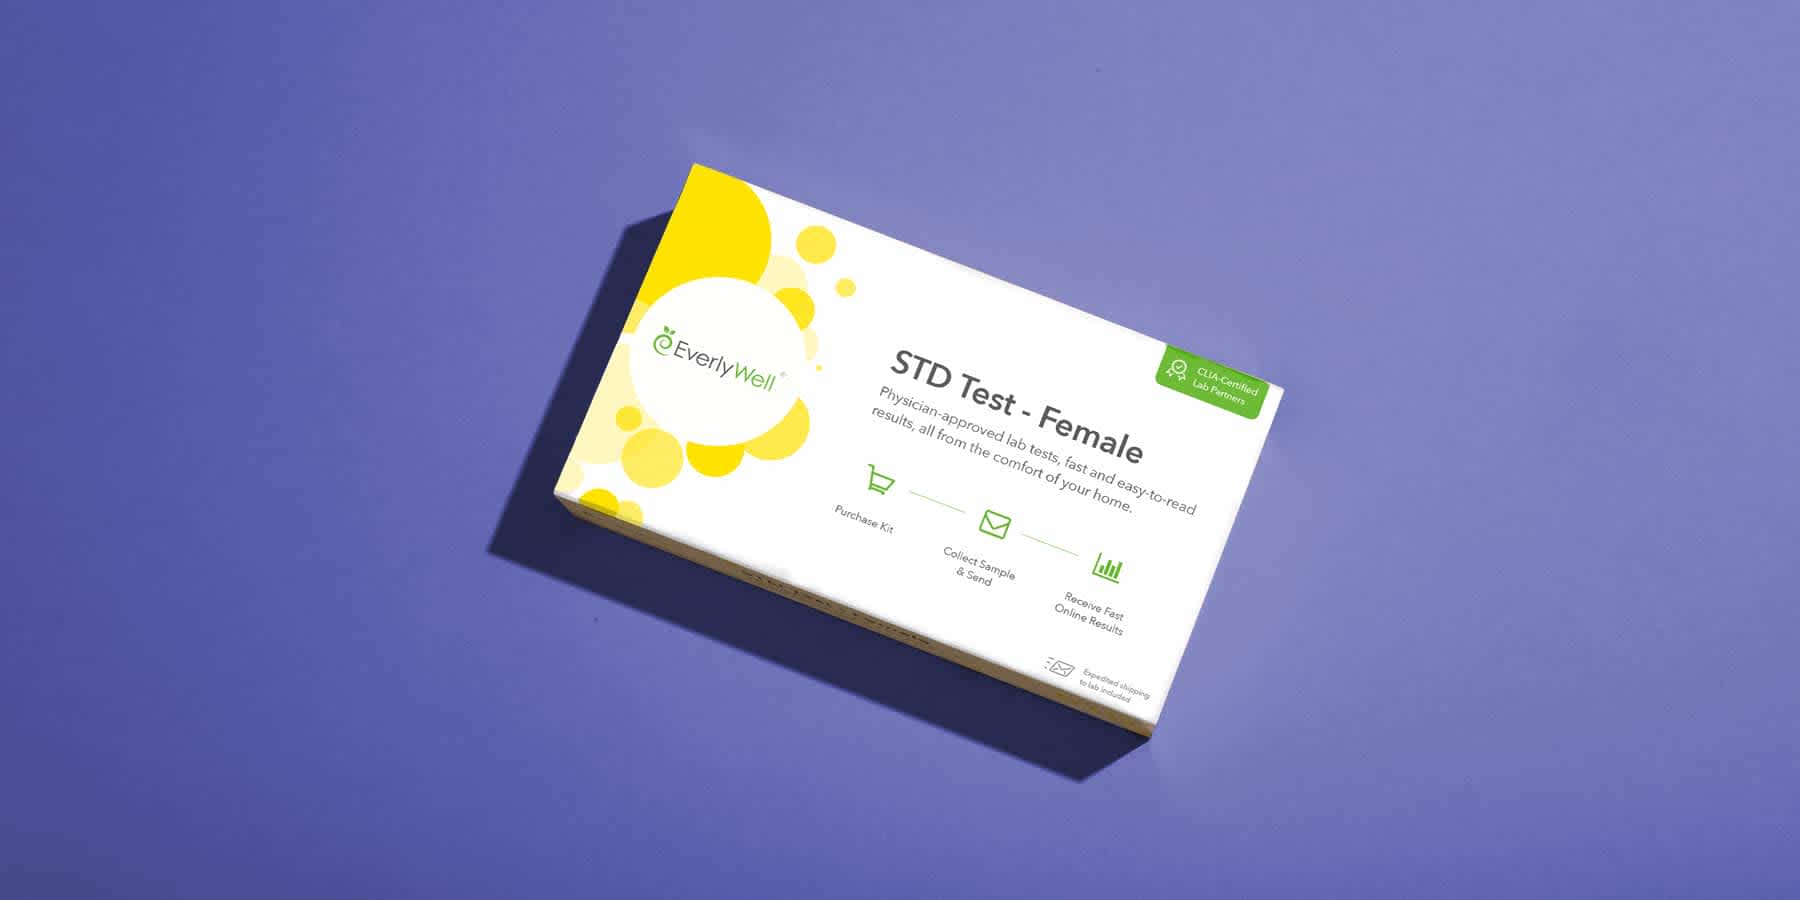 Image of the Everlywell STD Test - Female to check for STDs in women